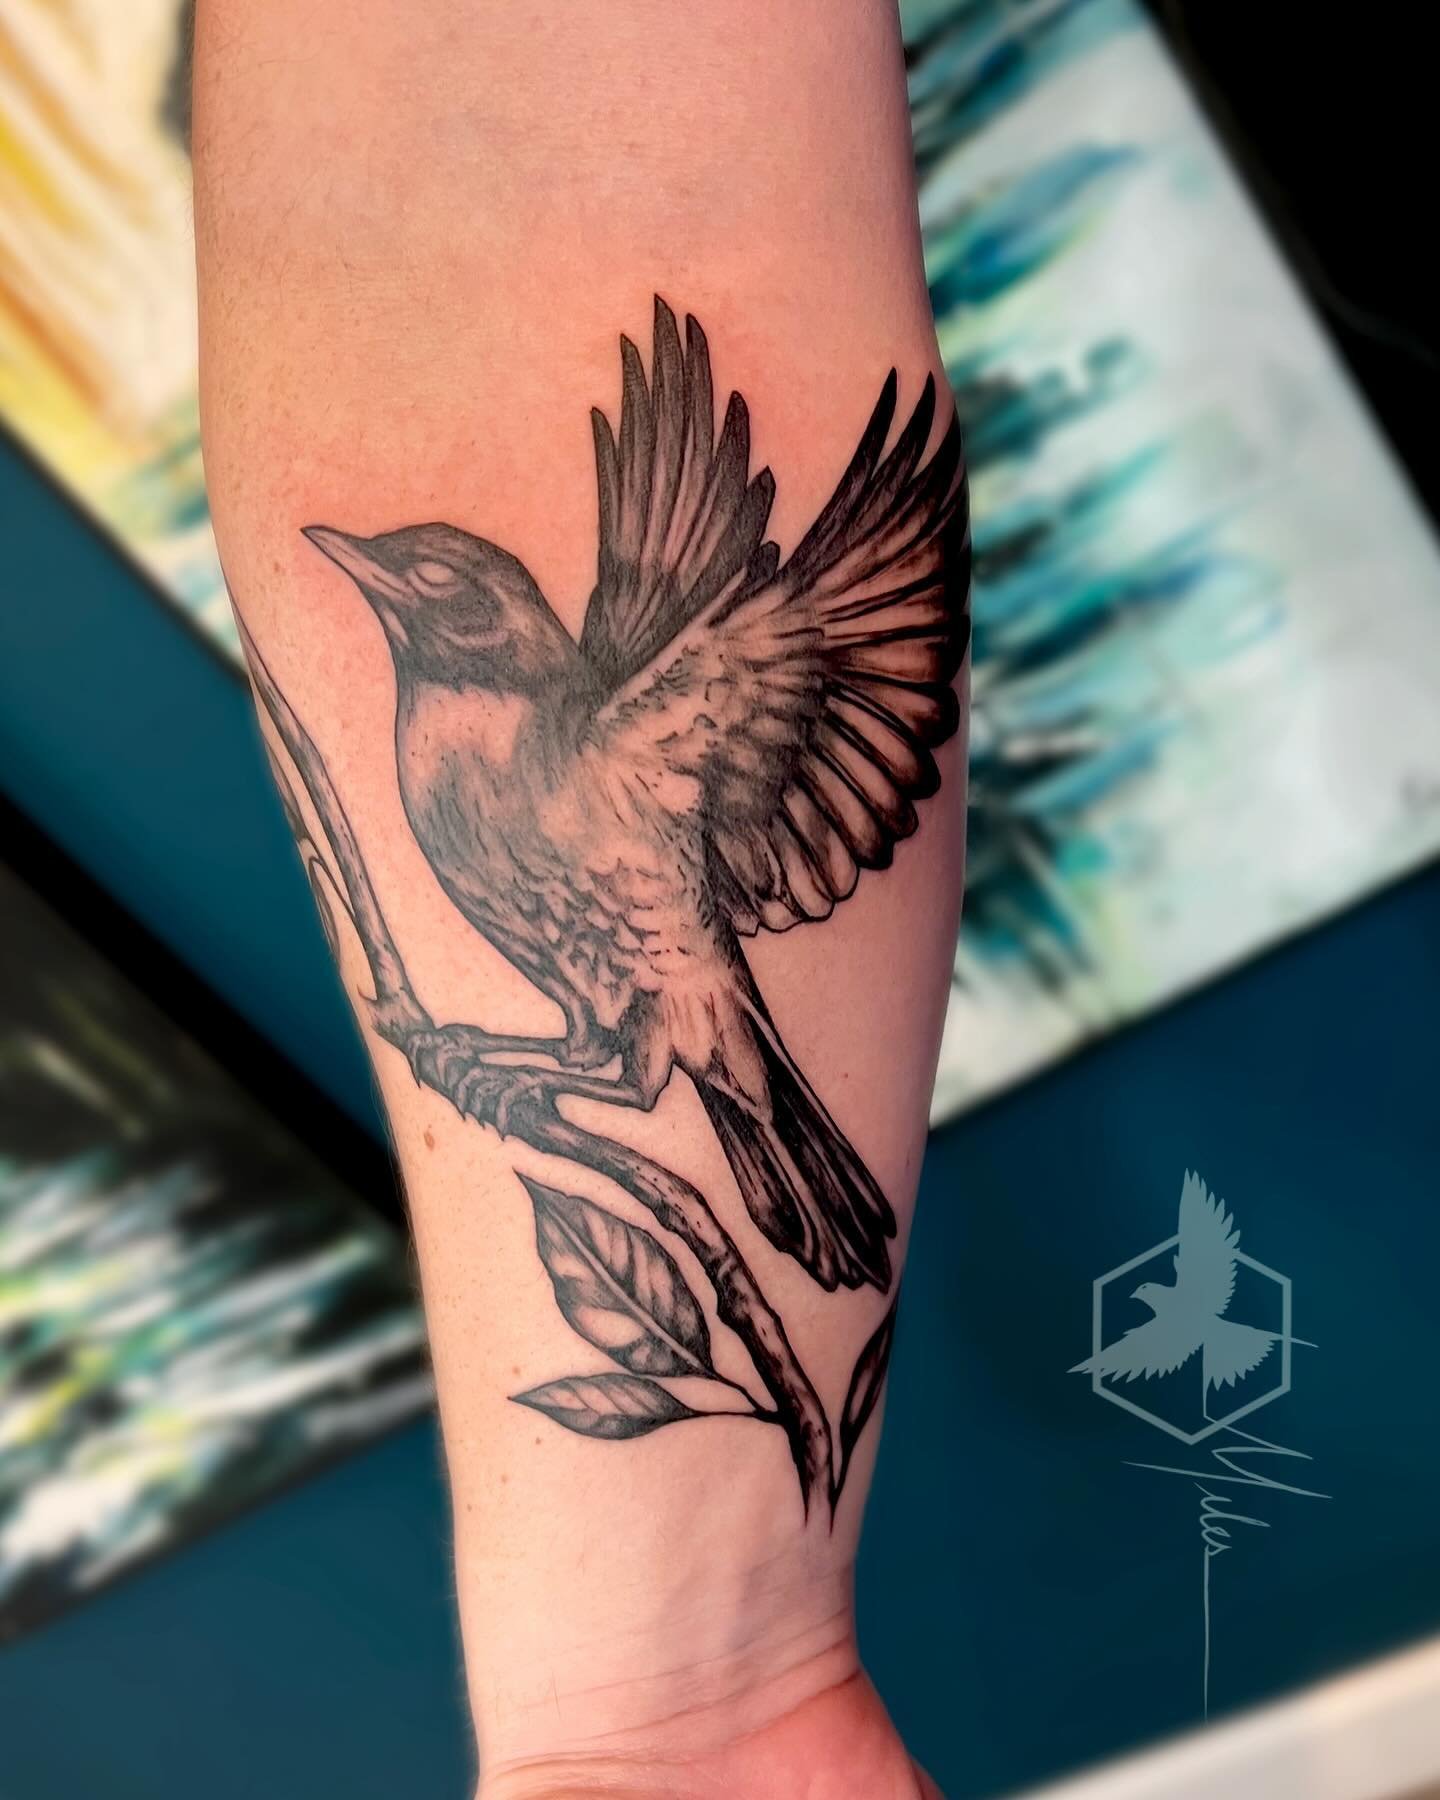 American Robin

An exciting first tattoo and start to this sleeve representing family through state birds. Thank you for your trust Justin!